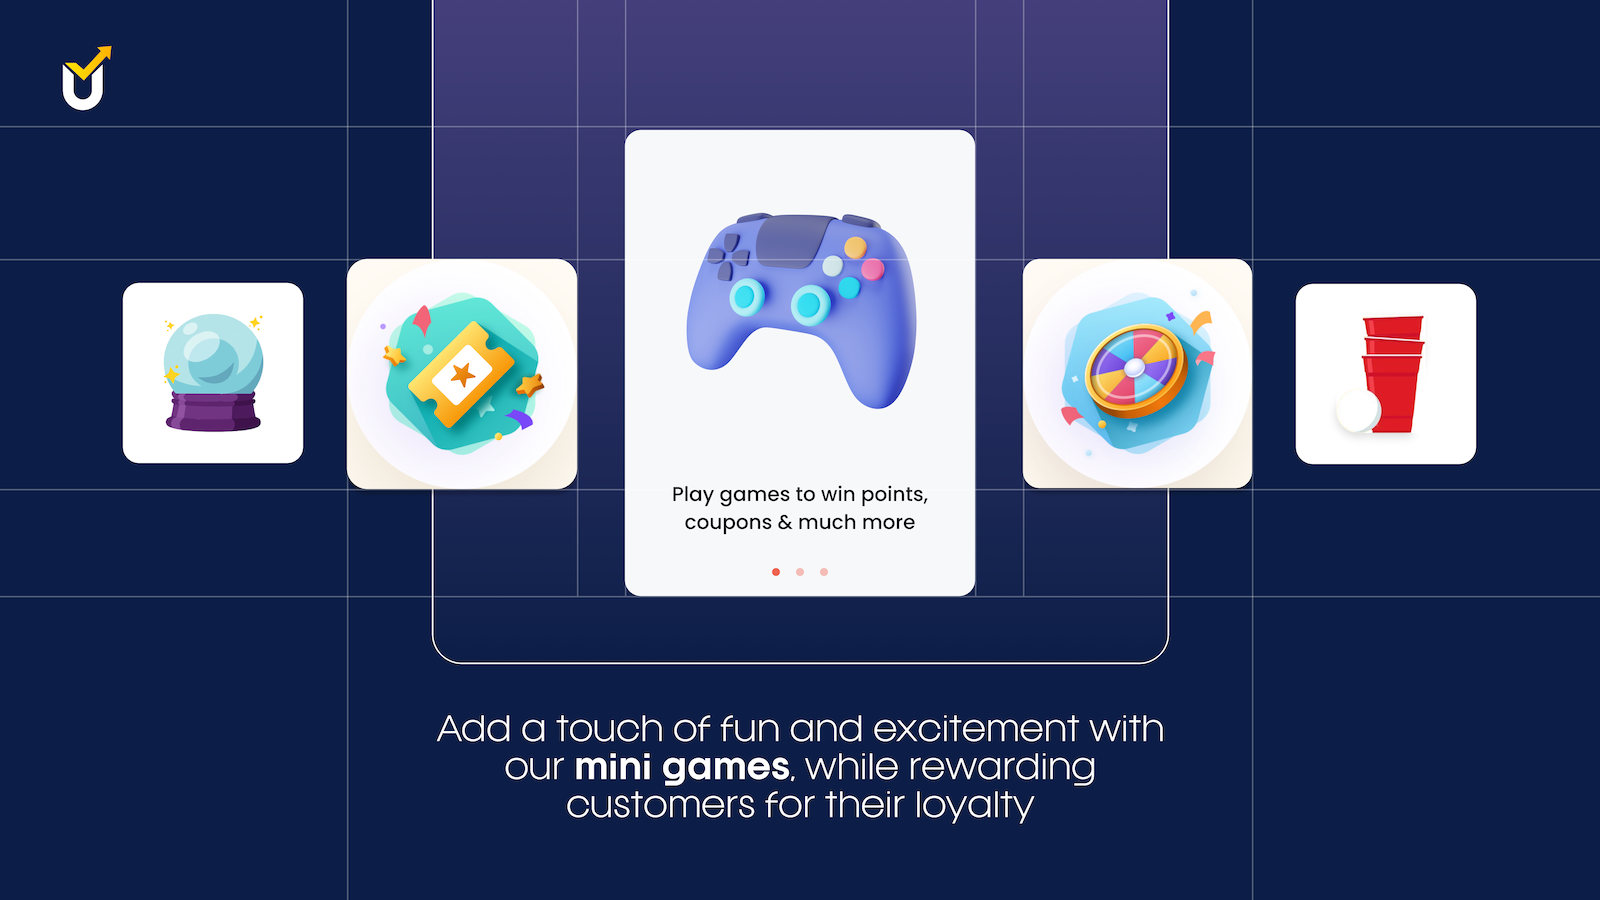 Foster customer loyalty through point-based incentives